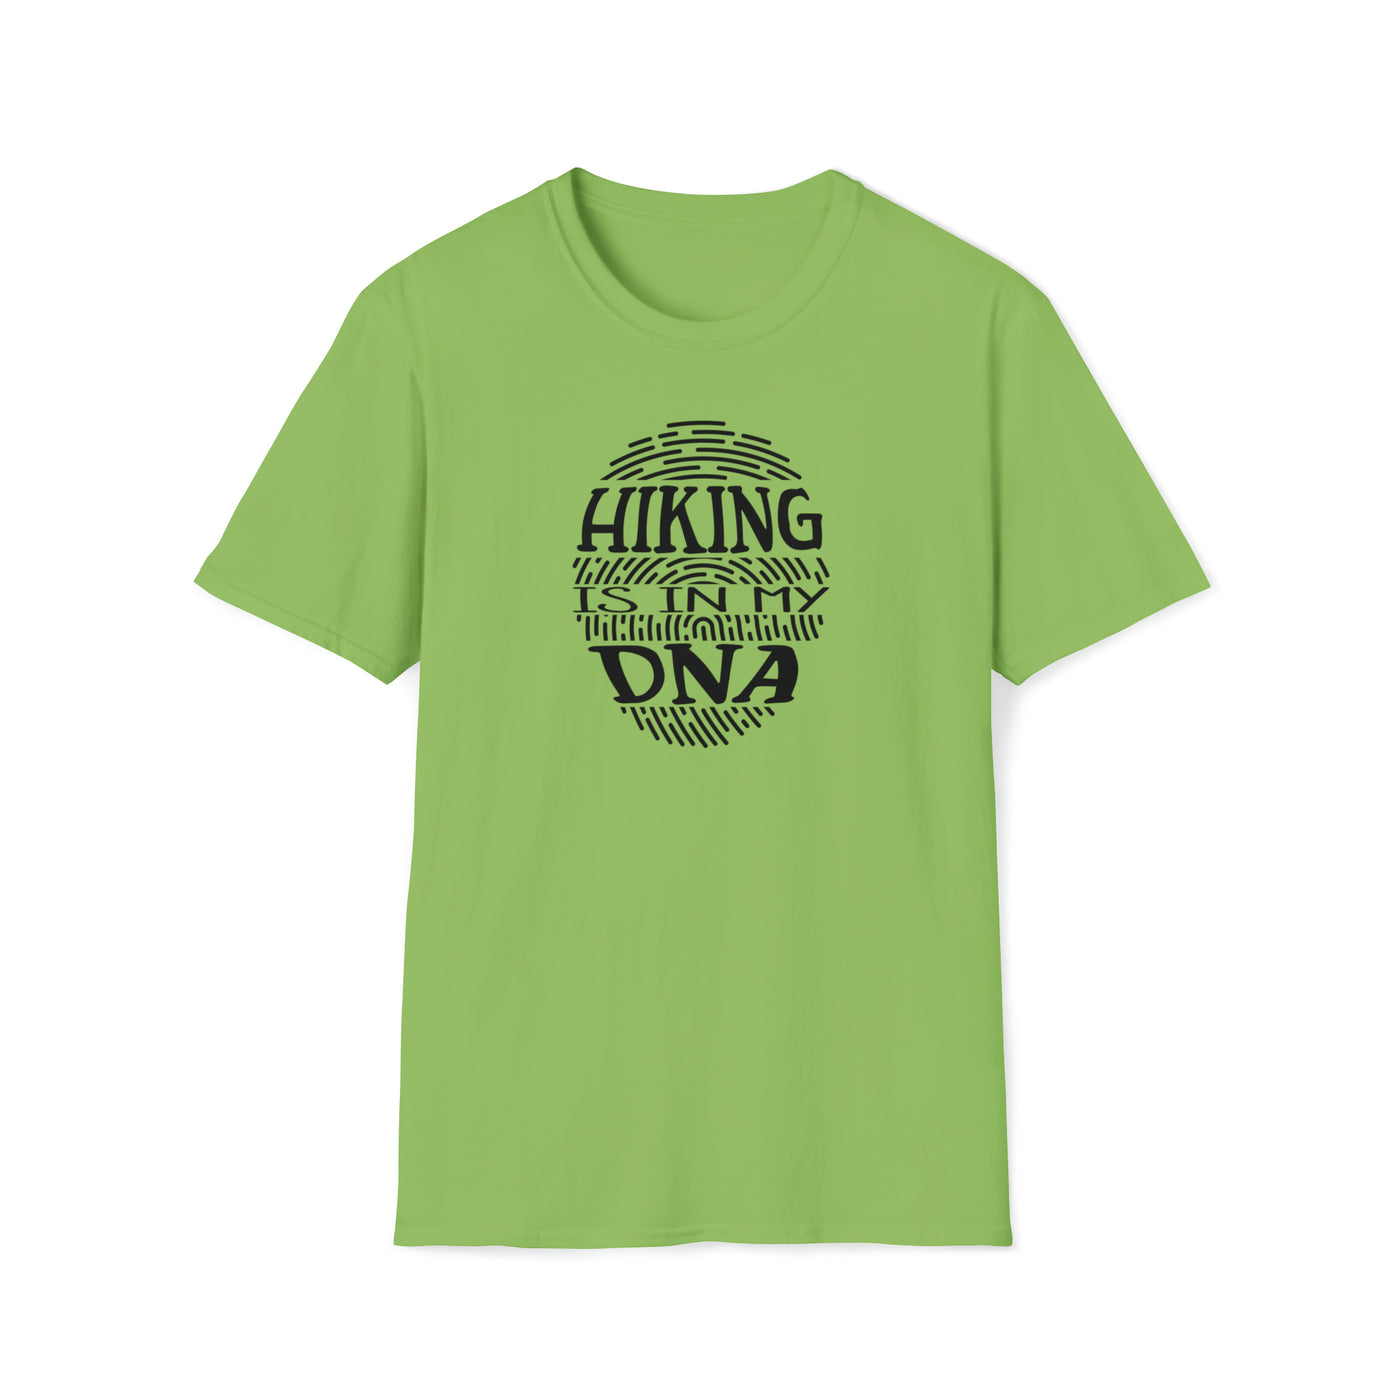 Hiking is in my DNA Unisex T-Shirt